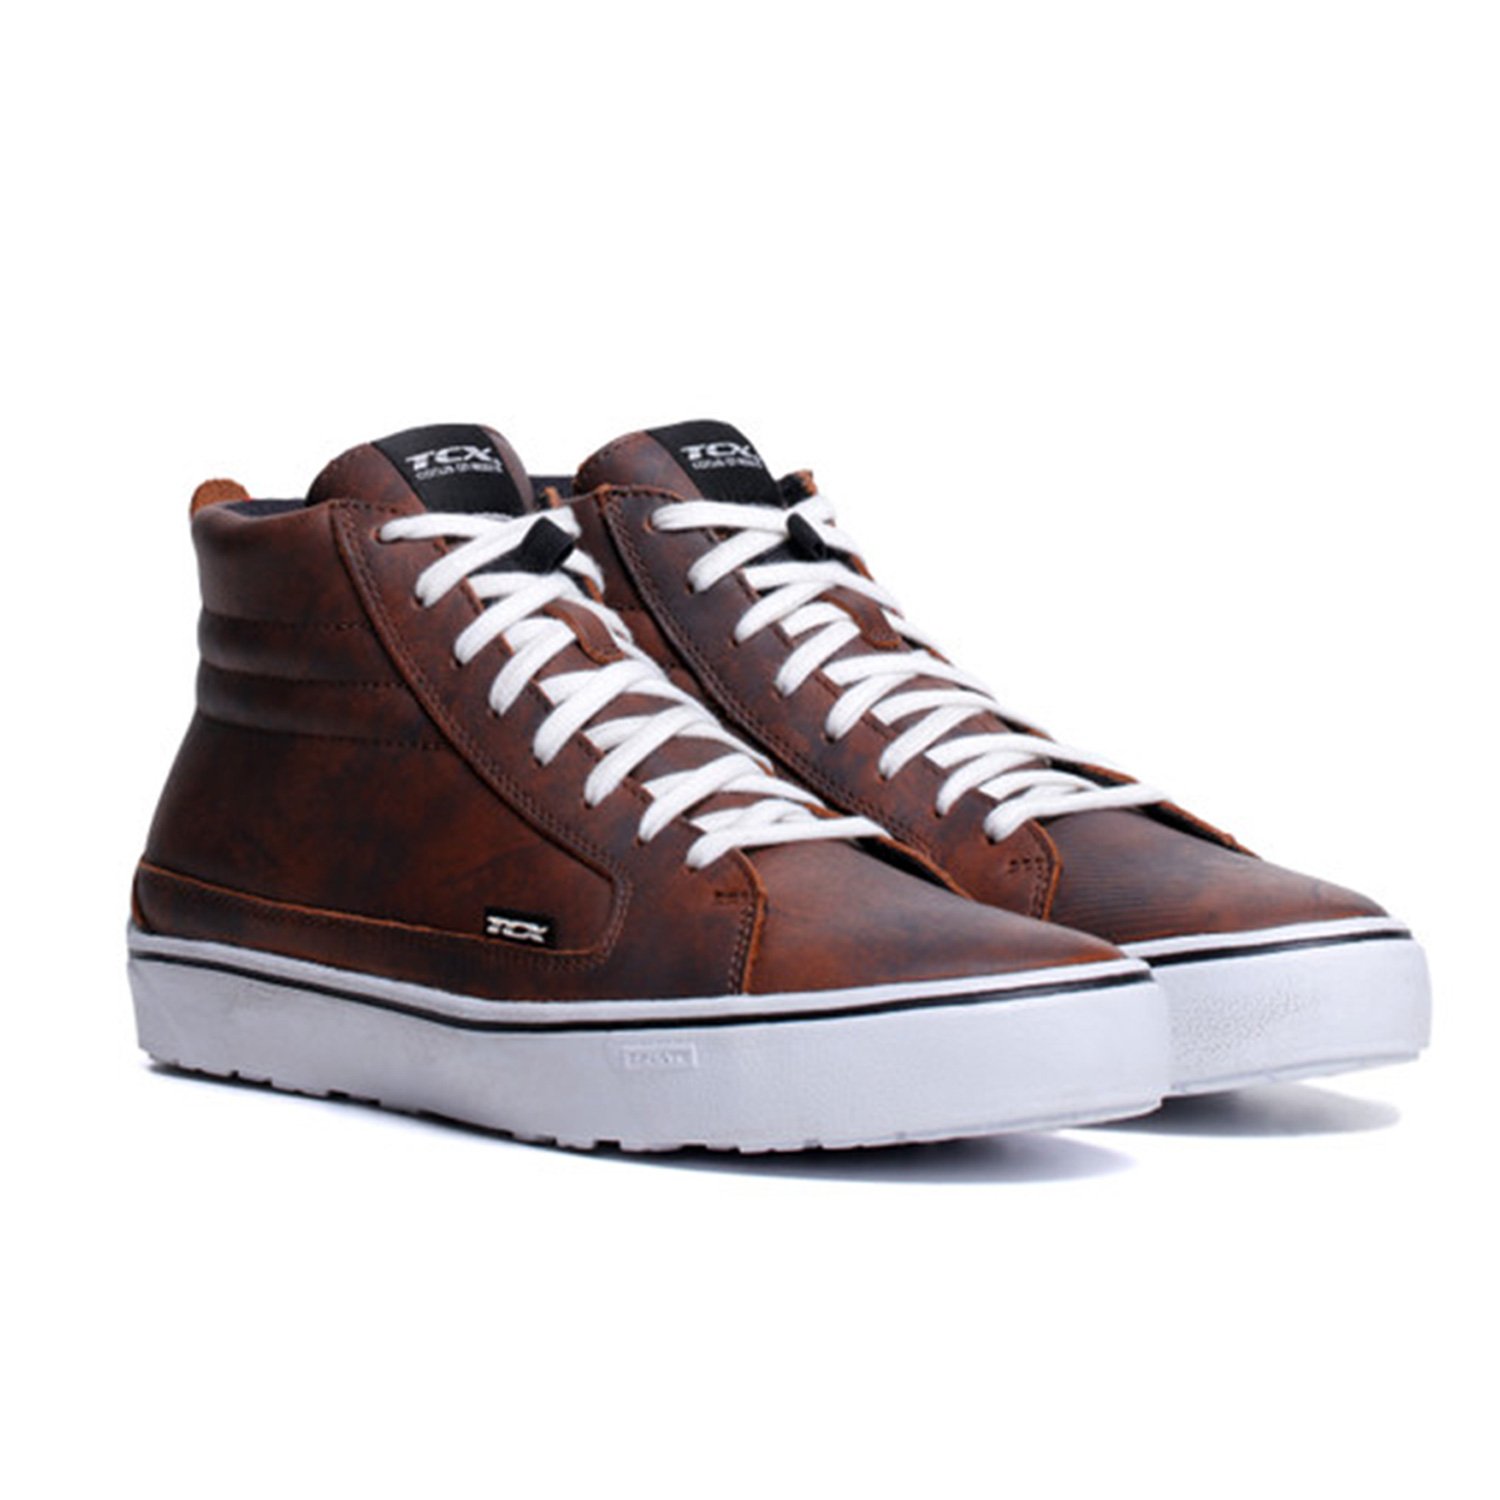 Image of EU TCX Street 3 WP Marron Blanc Chaussures Taille 48